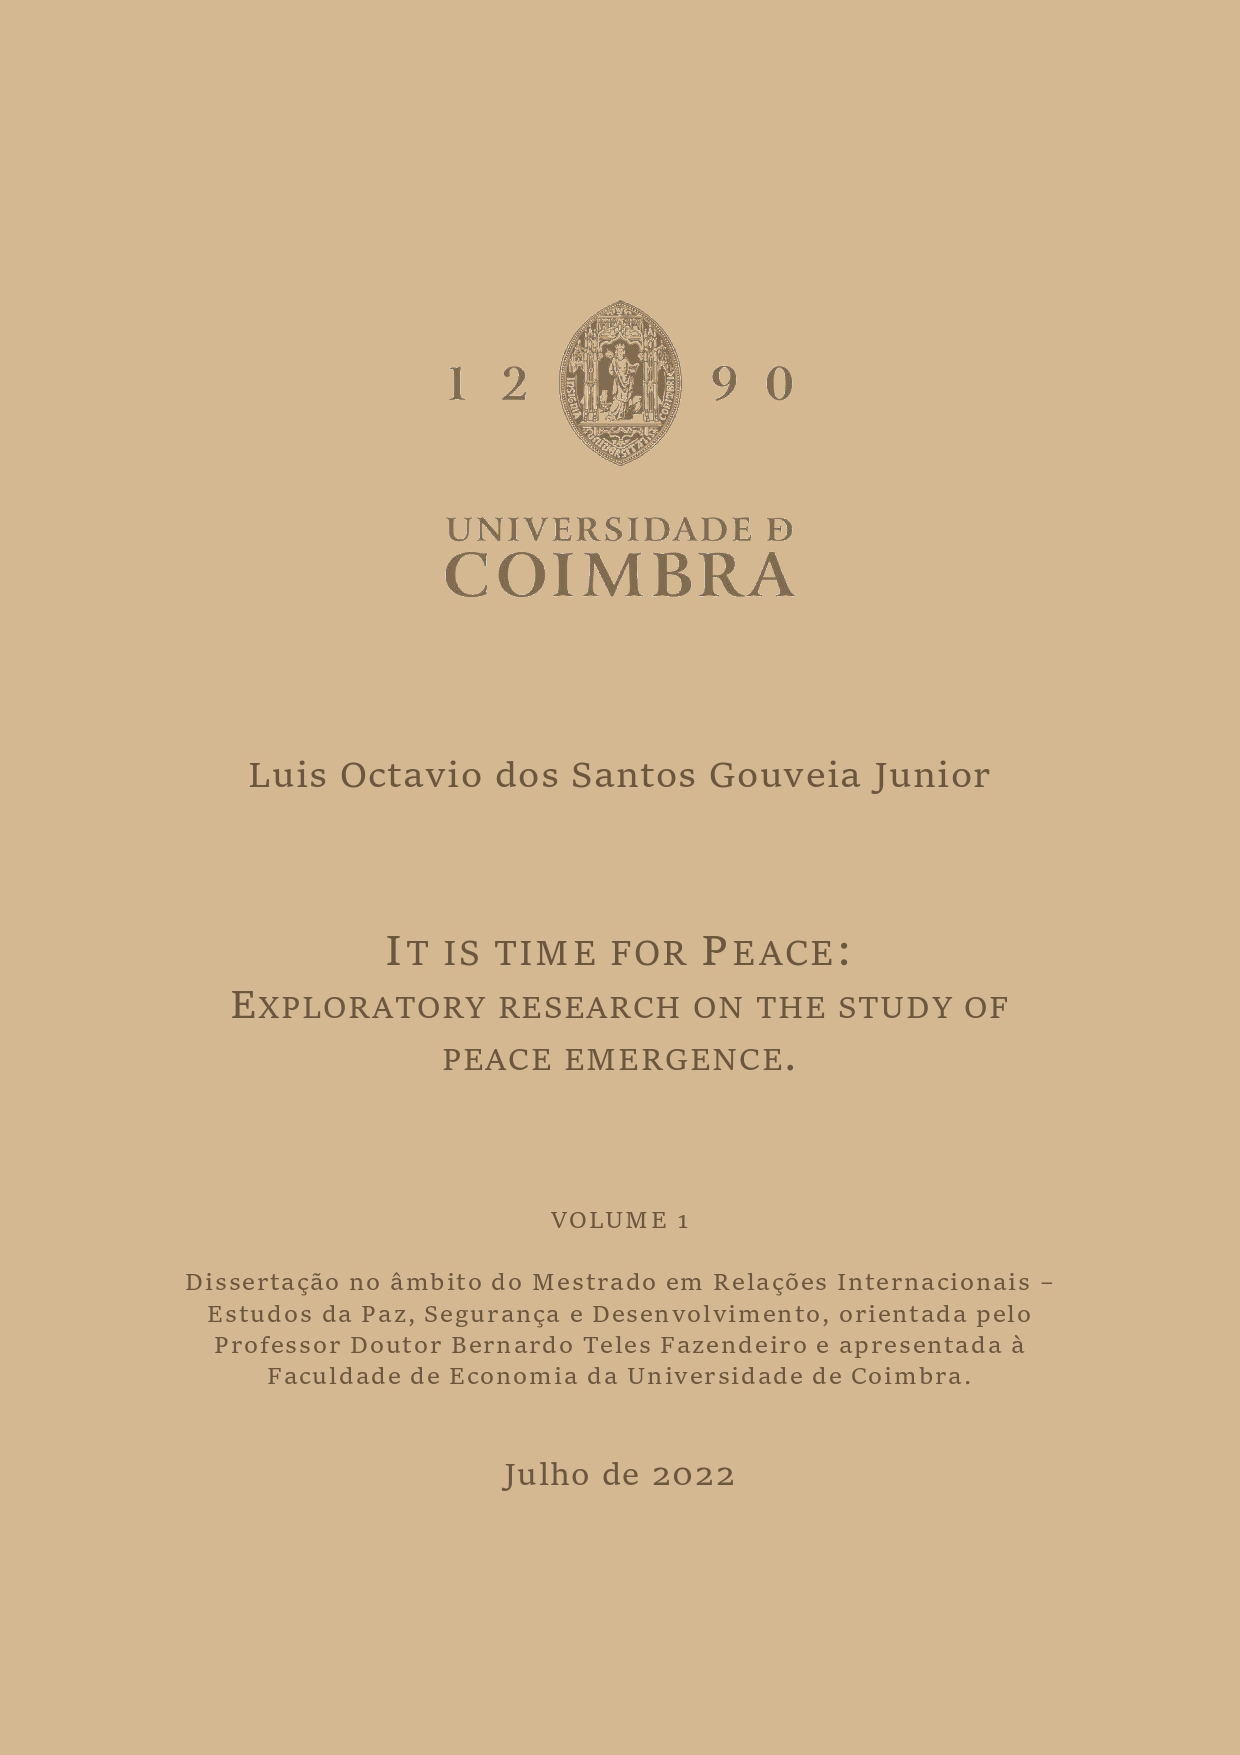 IT IS TIME FOR PEACE: EXPLORATORY RESEARCH ON THE STUDY OF PEACE EMERGENCE